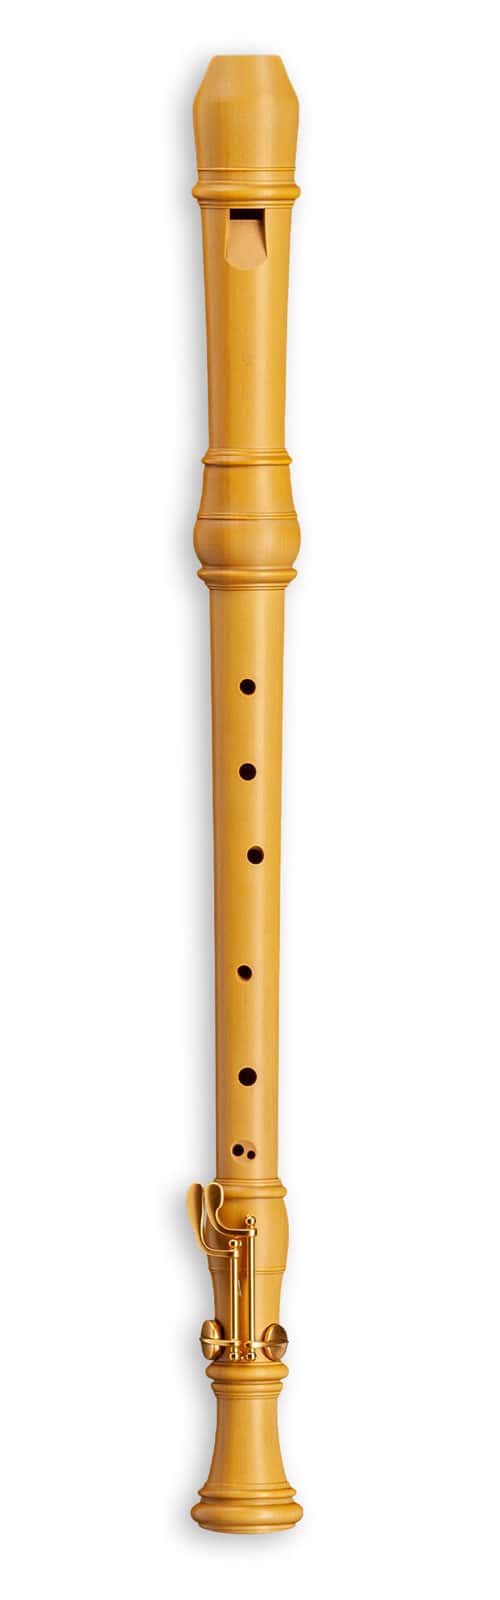 MOLLENHAUER DENNER TENOR WITH DOUBLE KEY 5432